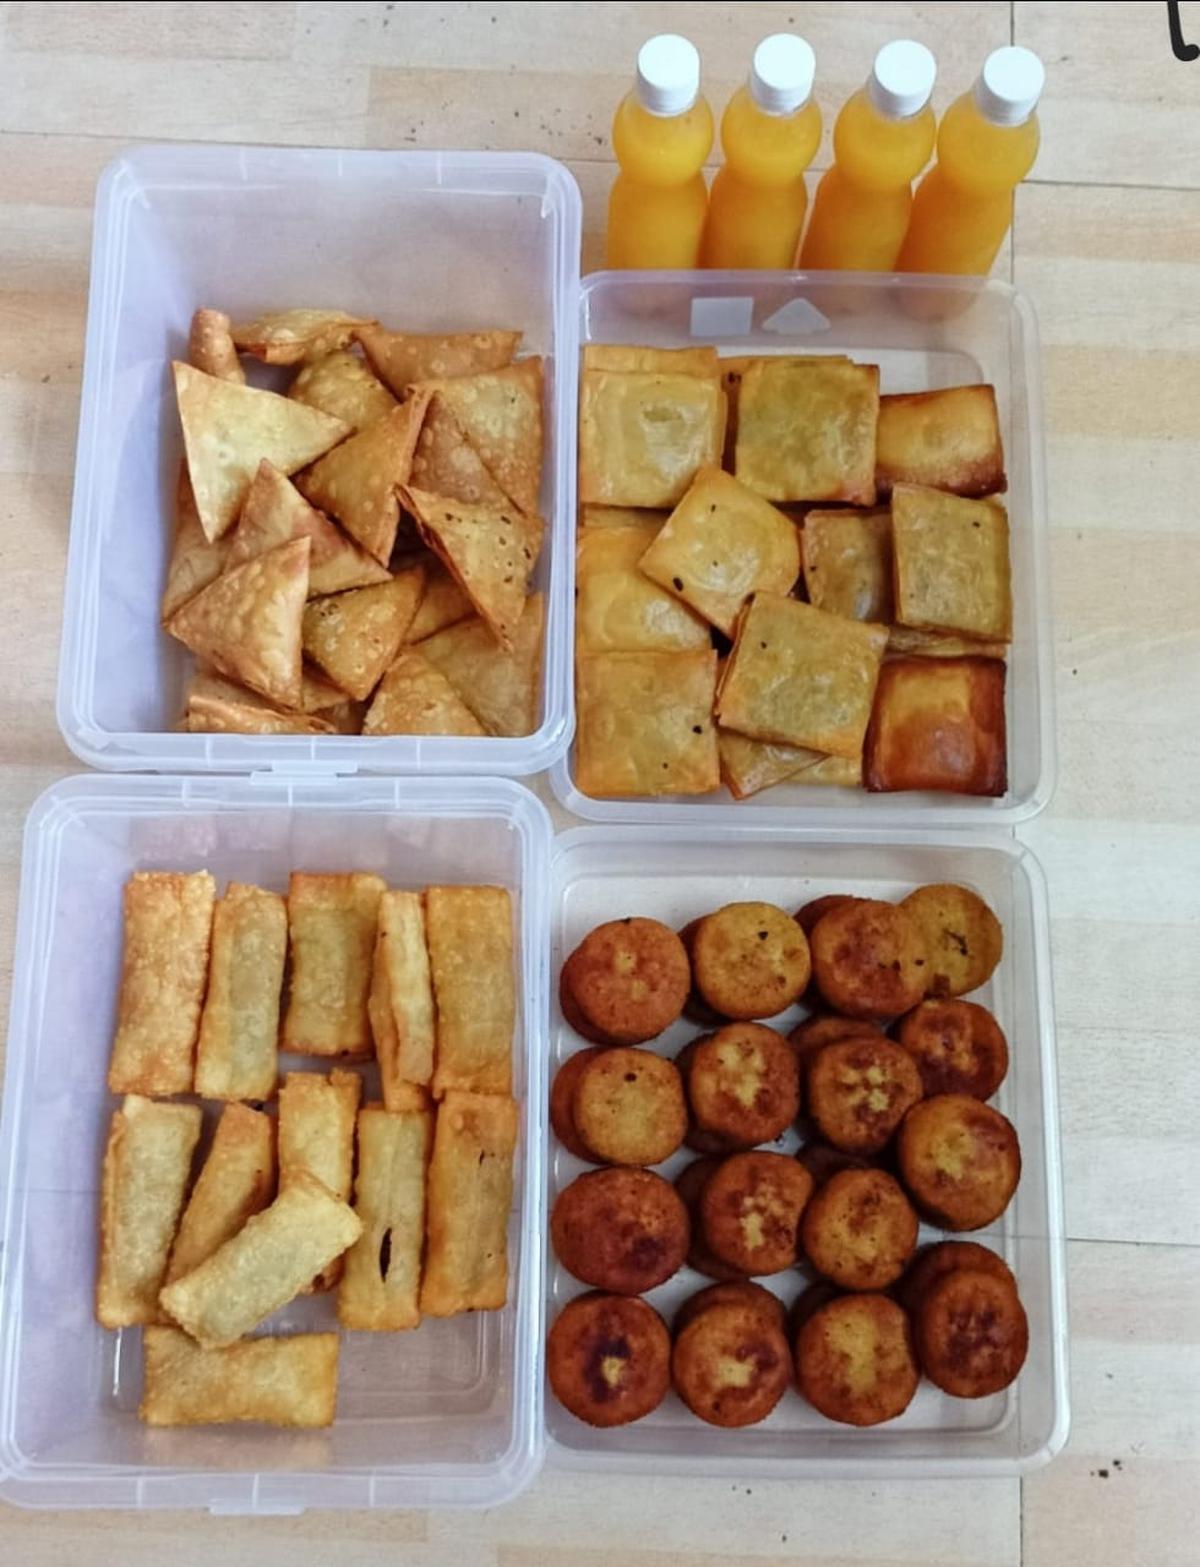 Assorted Malabari Snacks in Iftar Kit from Baked N' Cooked